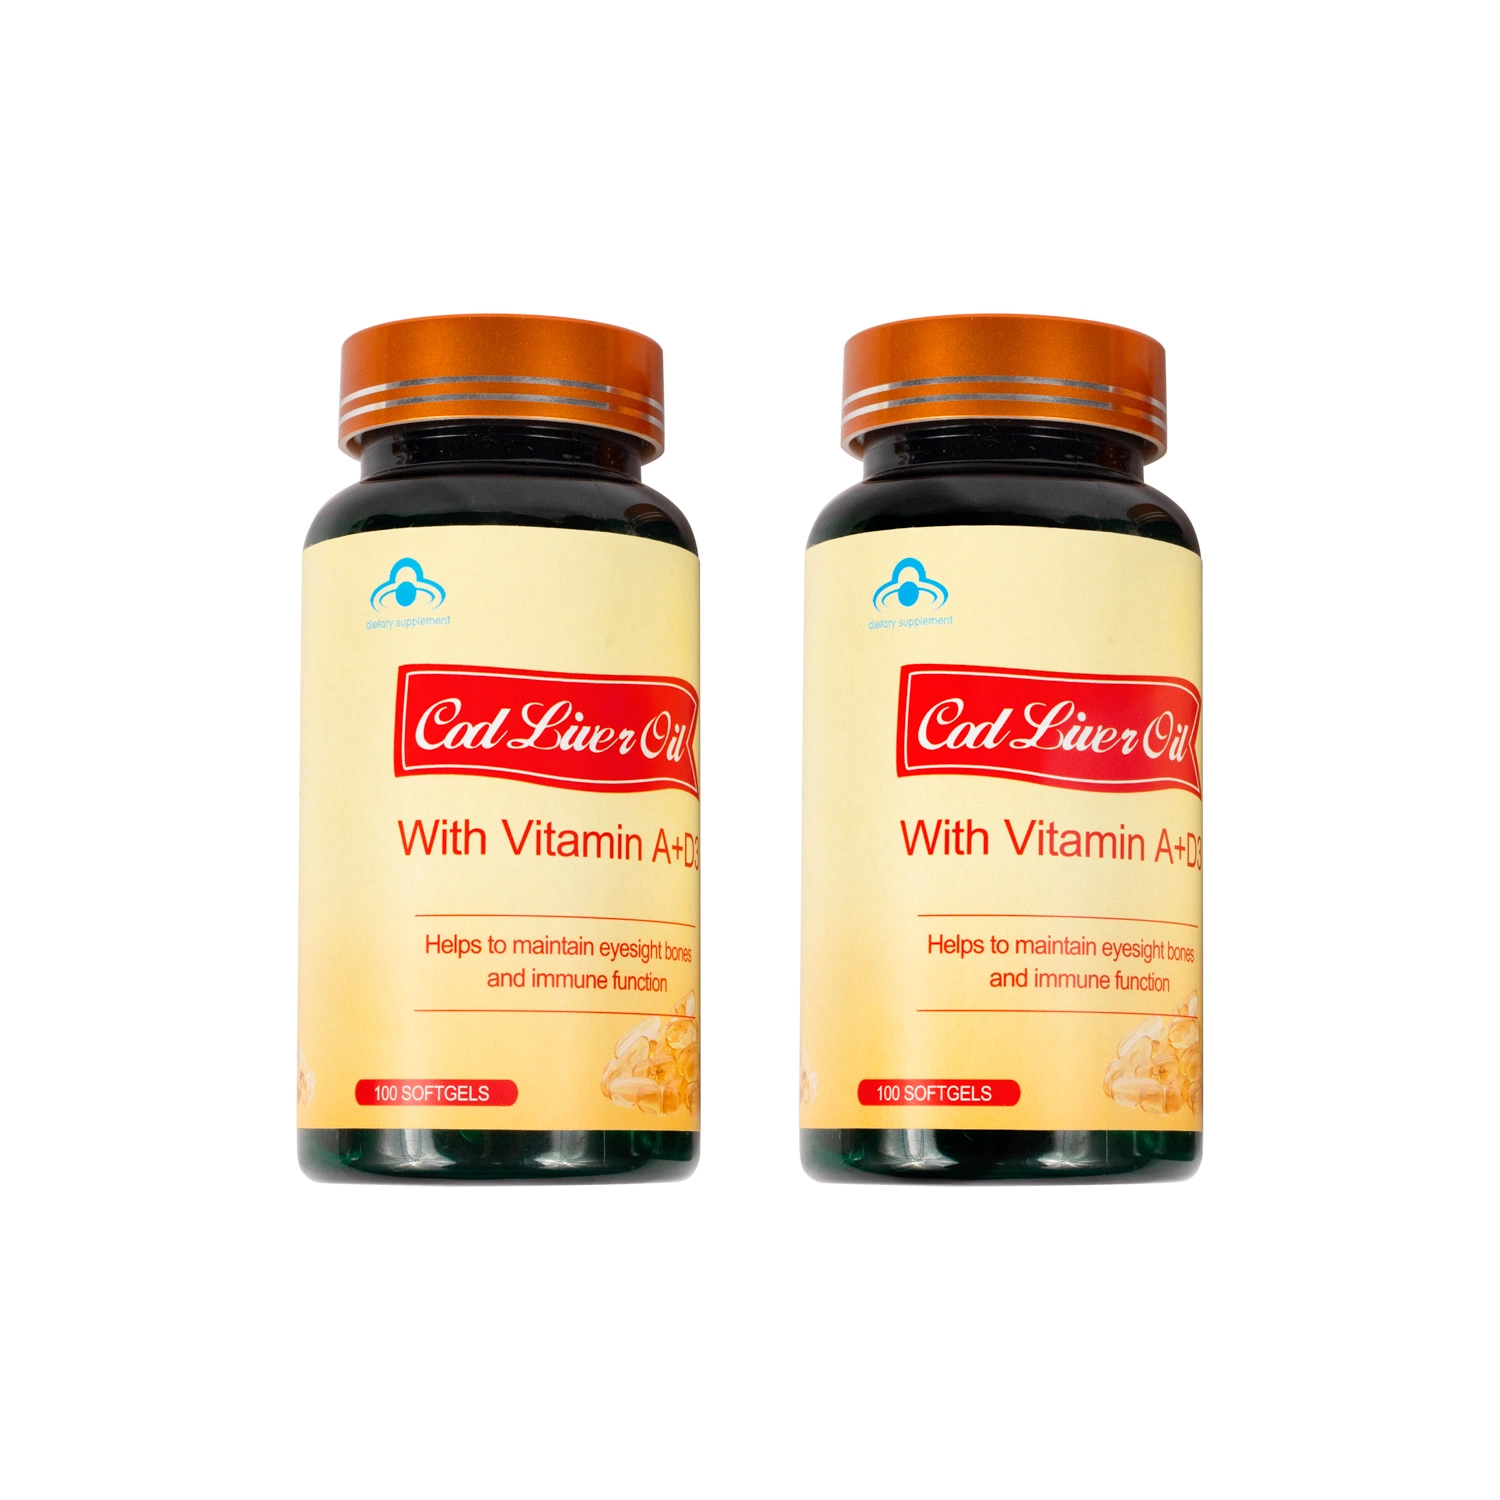 Health Care Product-High Quality Cod Liver Oil Soft Capsule